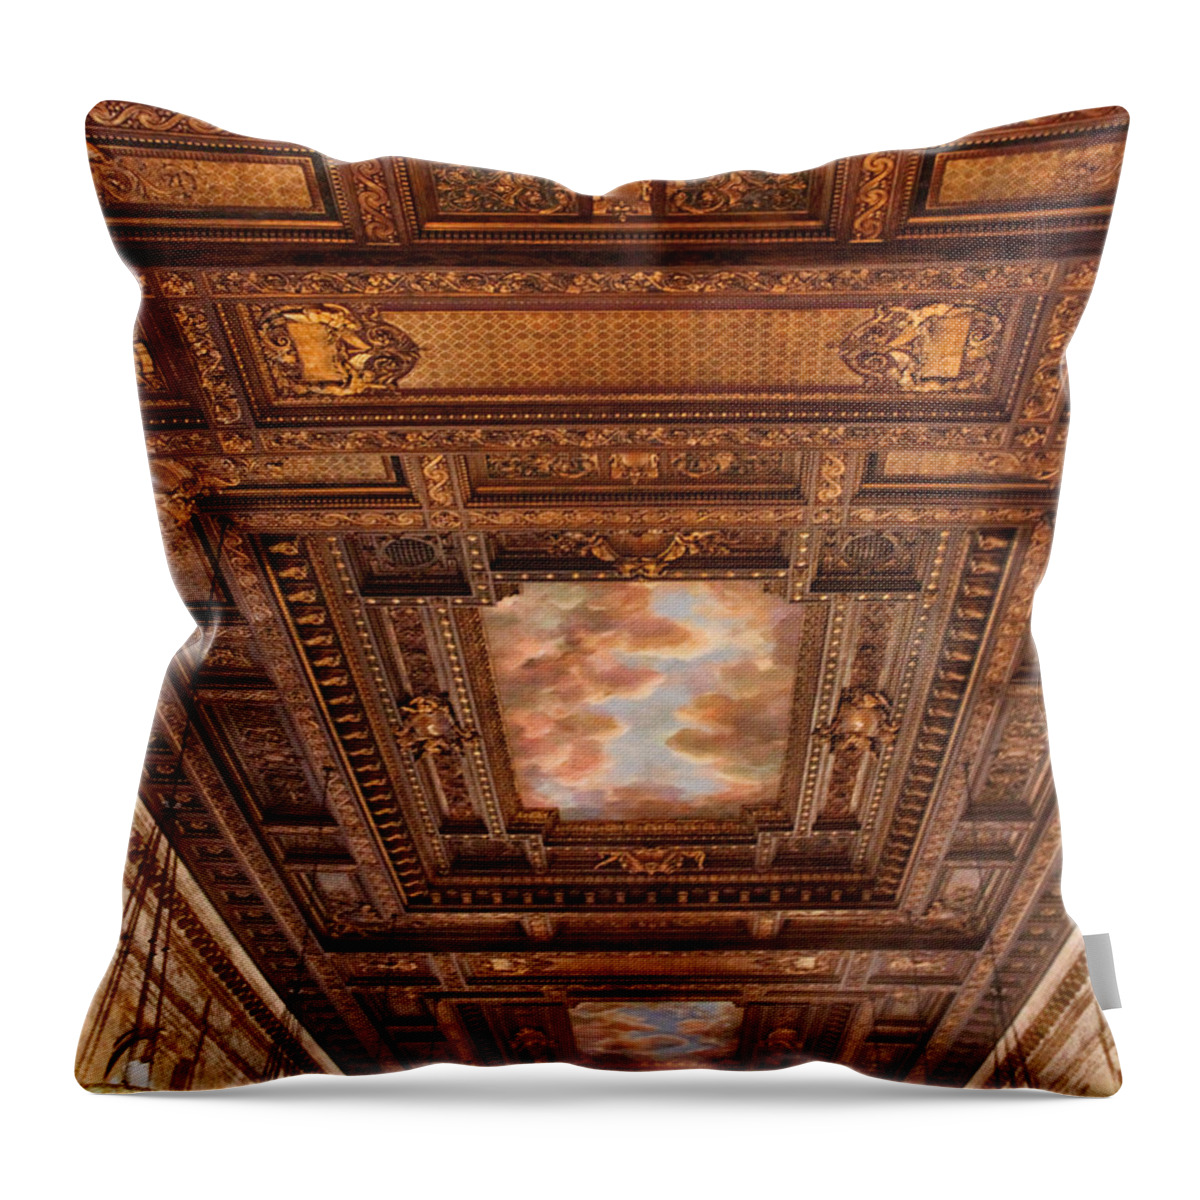 New York Public Library Throw Pillow featuring the photograph Rose Room Ceiling by Jessica Jenney